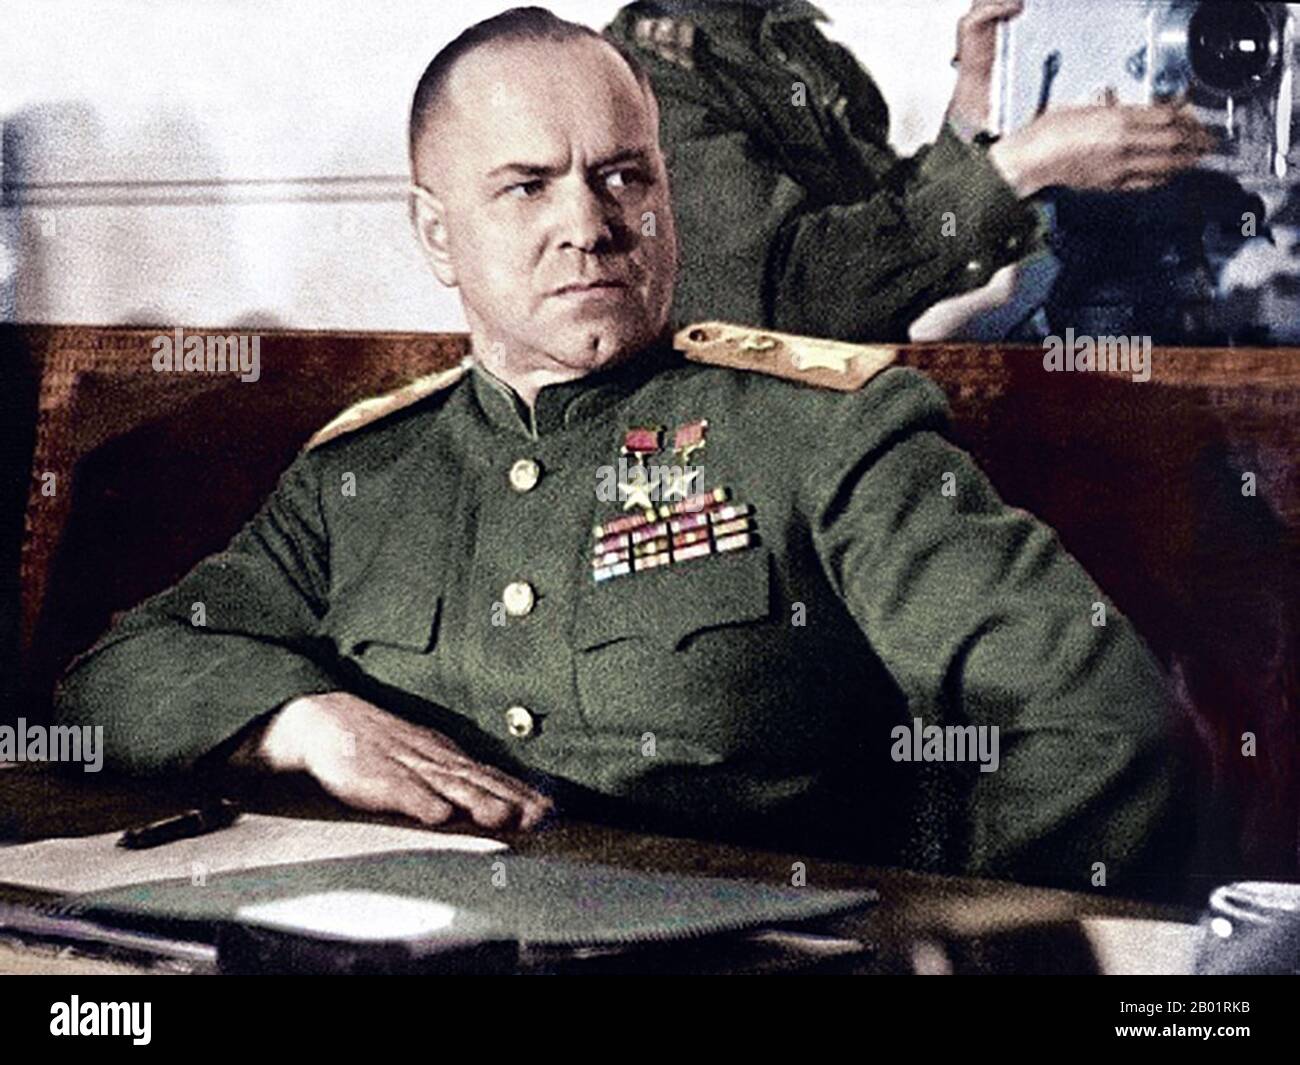 Russia: Marshal Georgy Zhukov (19 November 1896 - 18 June 1974), victor of Khalkin Gol (1938), signing the German surrender in Berlin, 2 May 1945.  Marshal of the Soviet Union Georgy Konstantinovich Zhukov was a Russian career officer in the Red Army who, in the course of World War II, played a pivotal role in leading the Red Army through much of Eastern Europe to liberate the Soviet Union and other nations from the Axis Powers' occupation and conquer Germany's capital, Berlin. He is the most decorated general in the history of Russia and the Soviet Union. Stock Photo